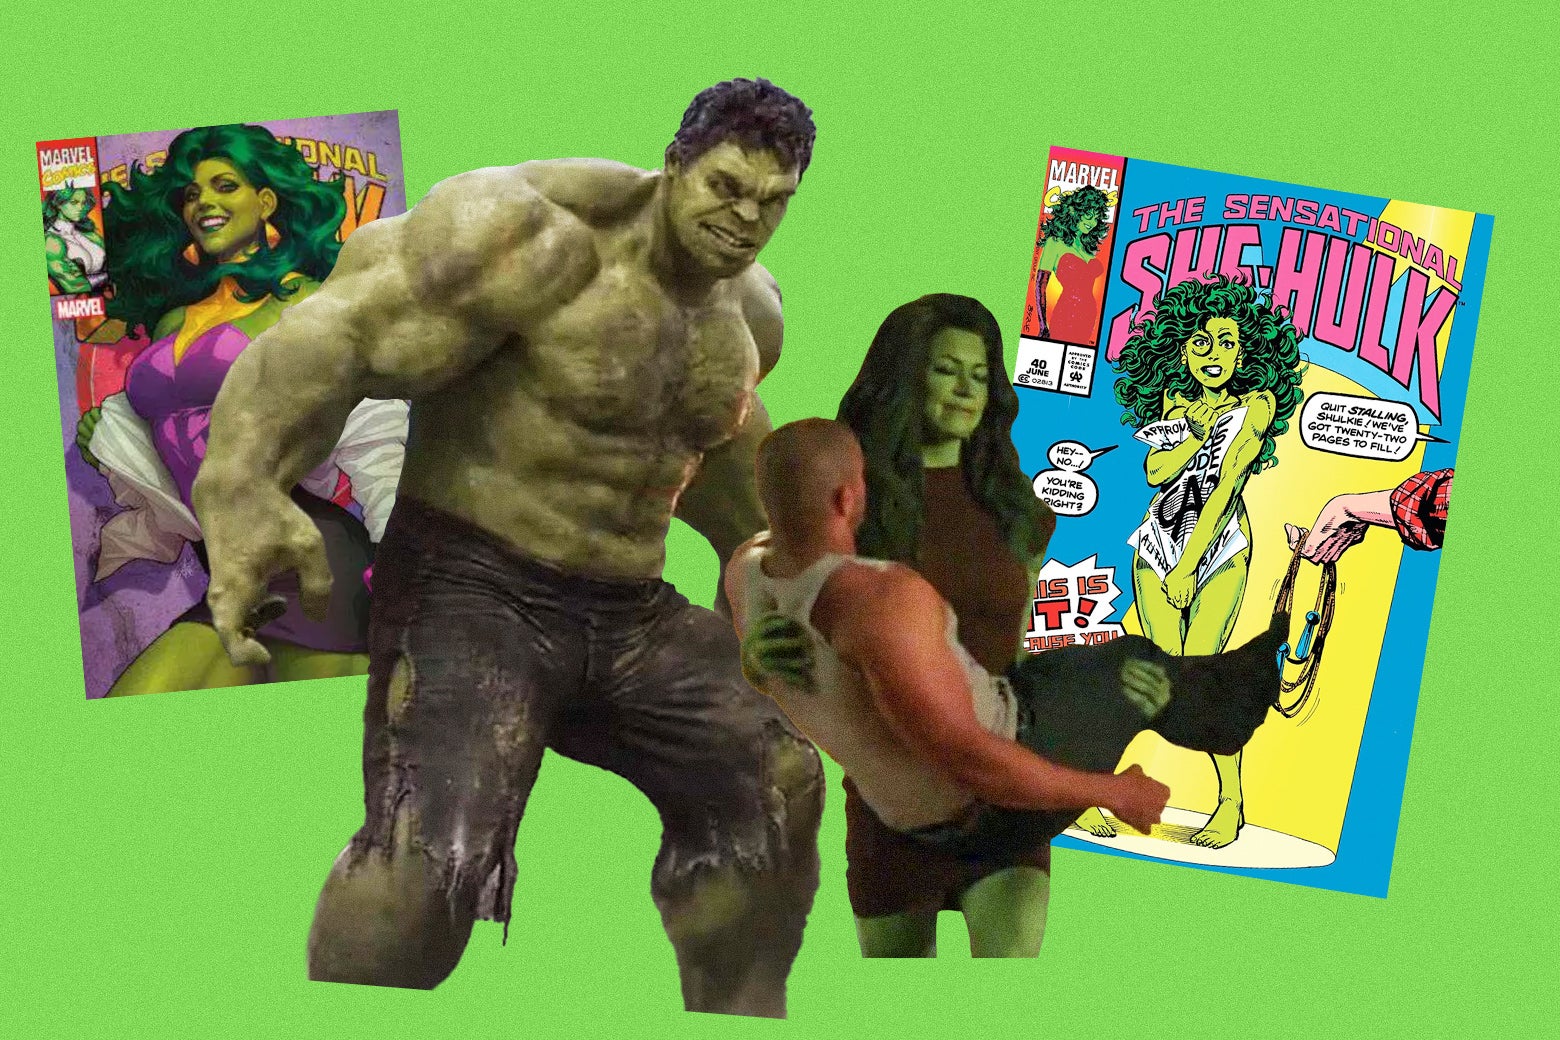 The Hulk and a woman cradling a man in her arms are seen against a background that also features two issues of the She-Hulk comics.